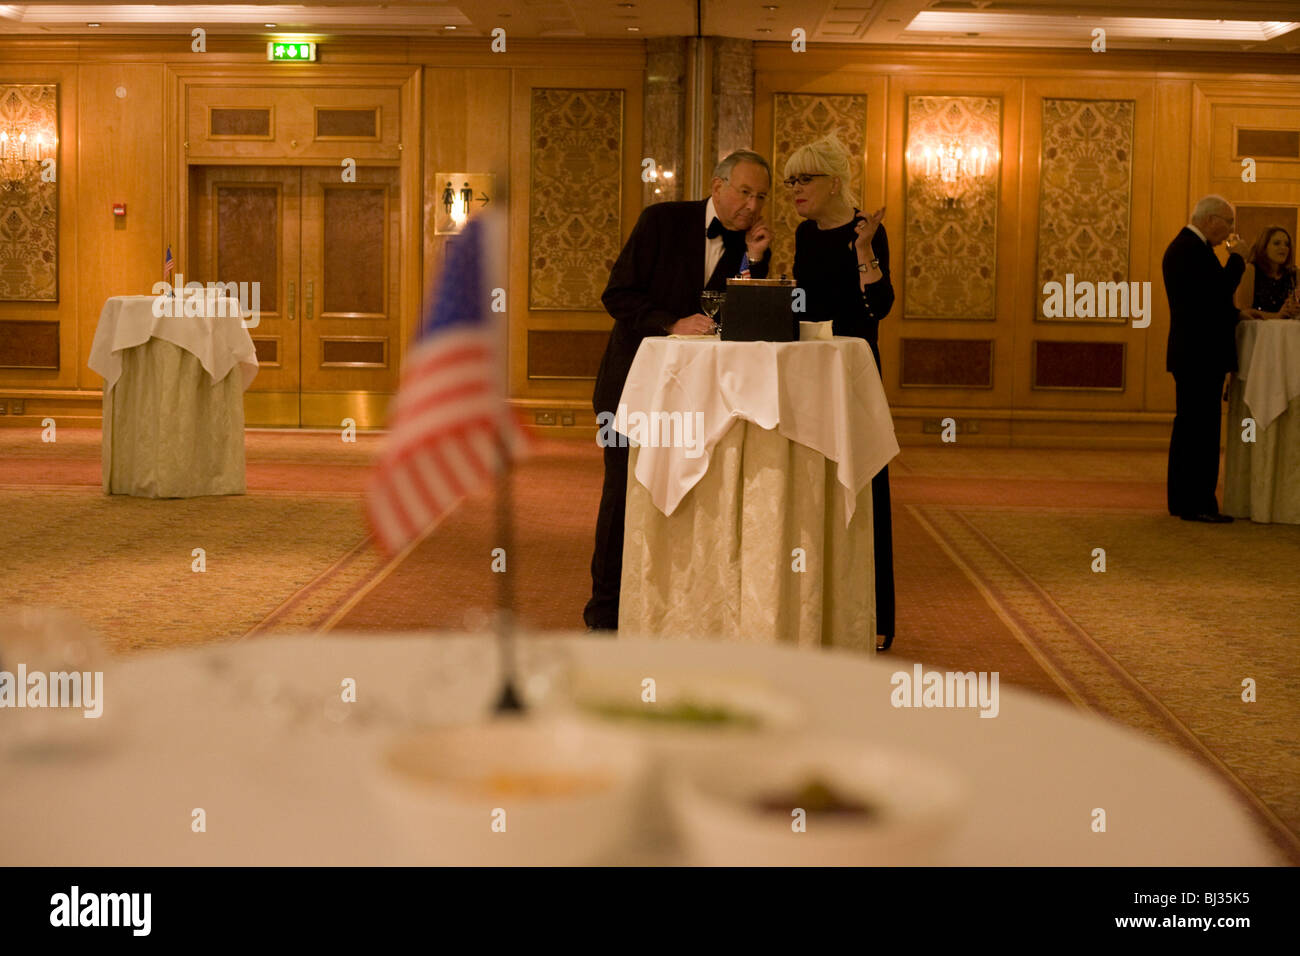 US citizens and Democrats Abroad party supporters talk in empty ballroom before others arrive to celebrate Obama's inauguration Stock Photo